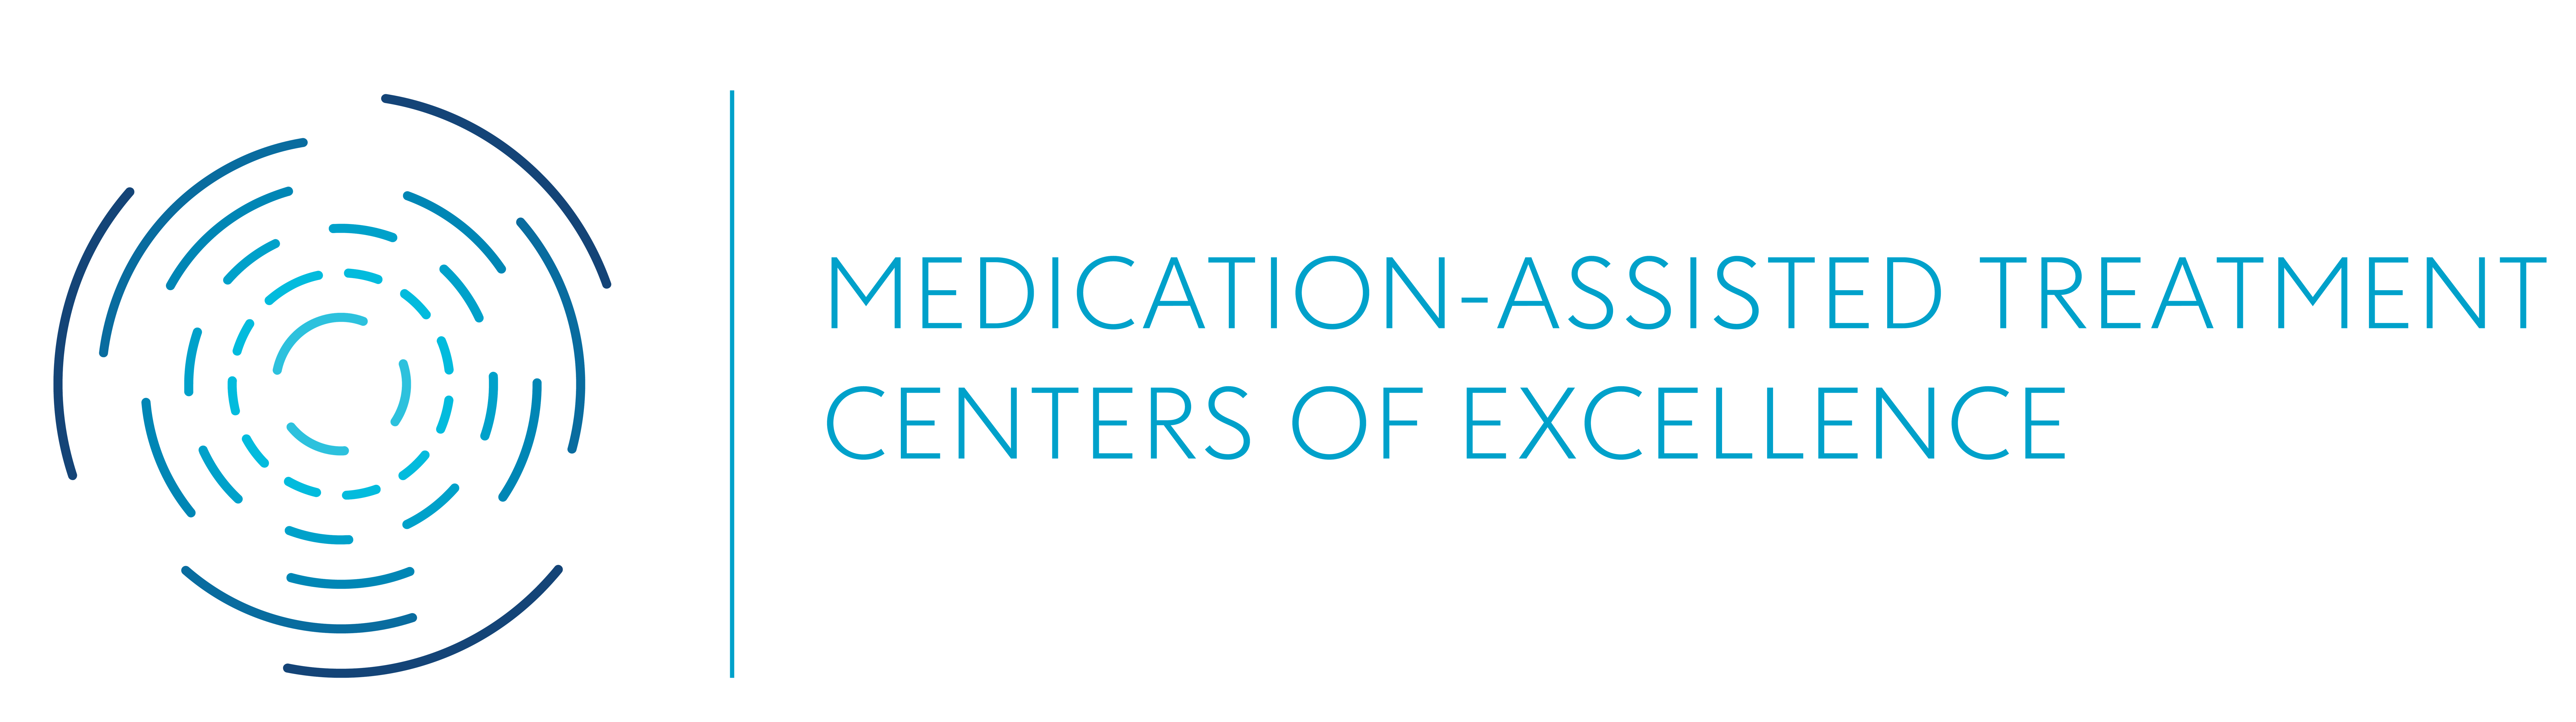 Northern NJ Medication-Assisted Treatment Center of Excellence